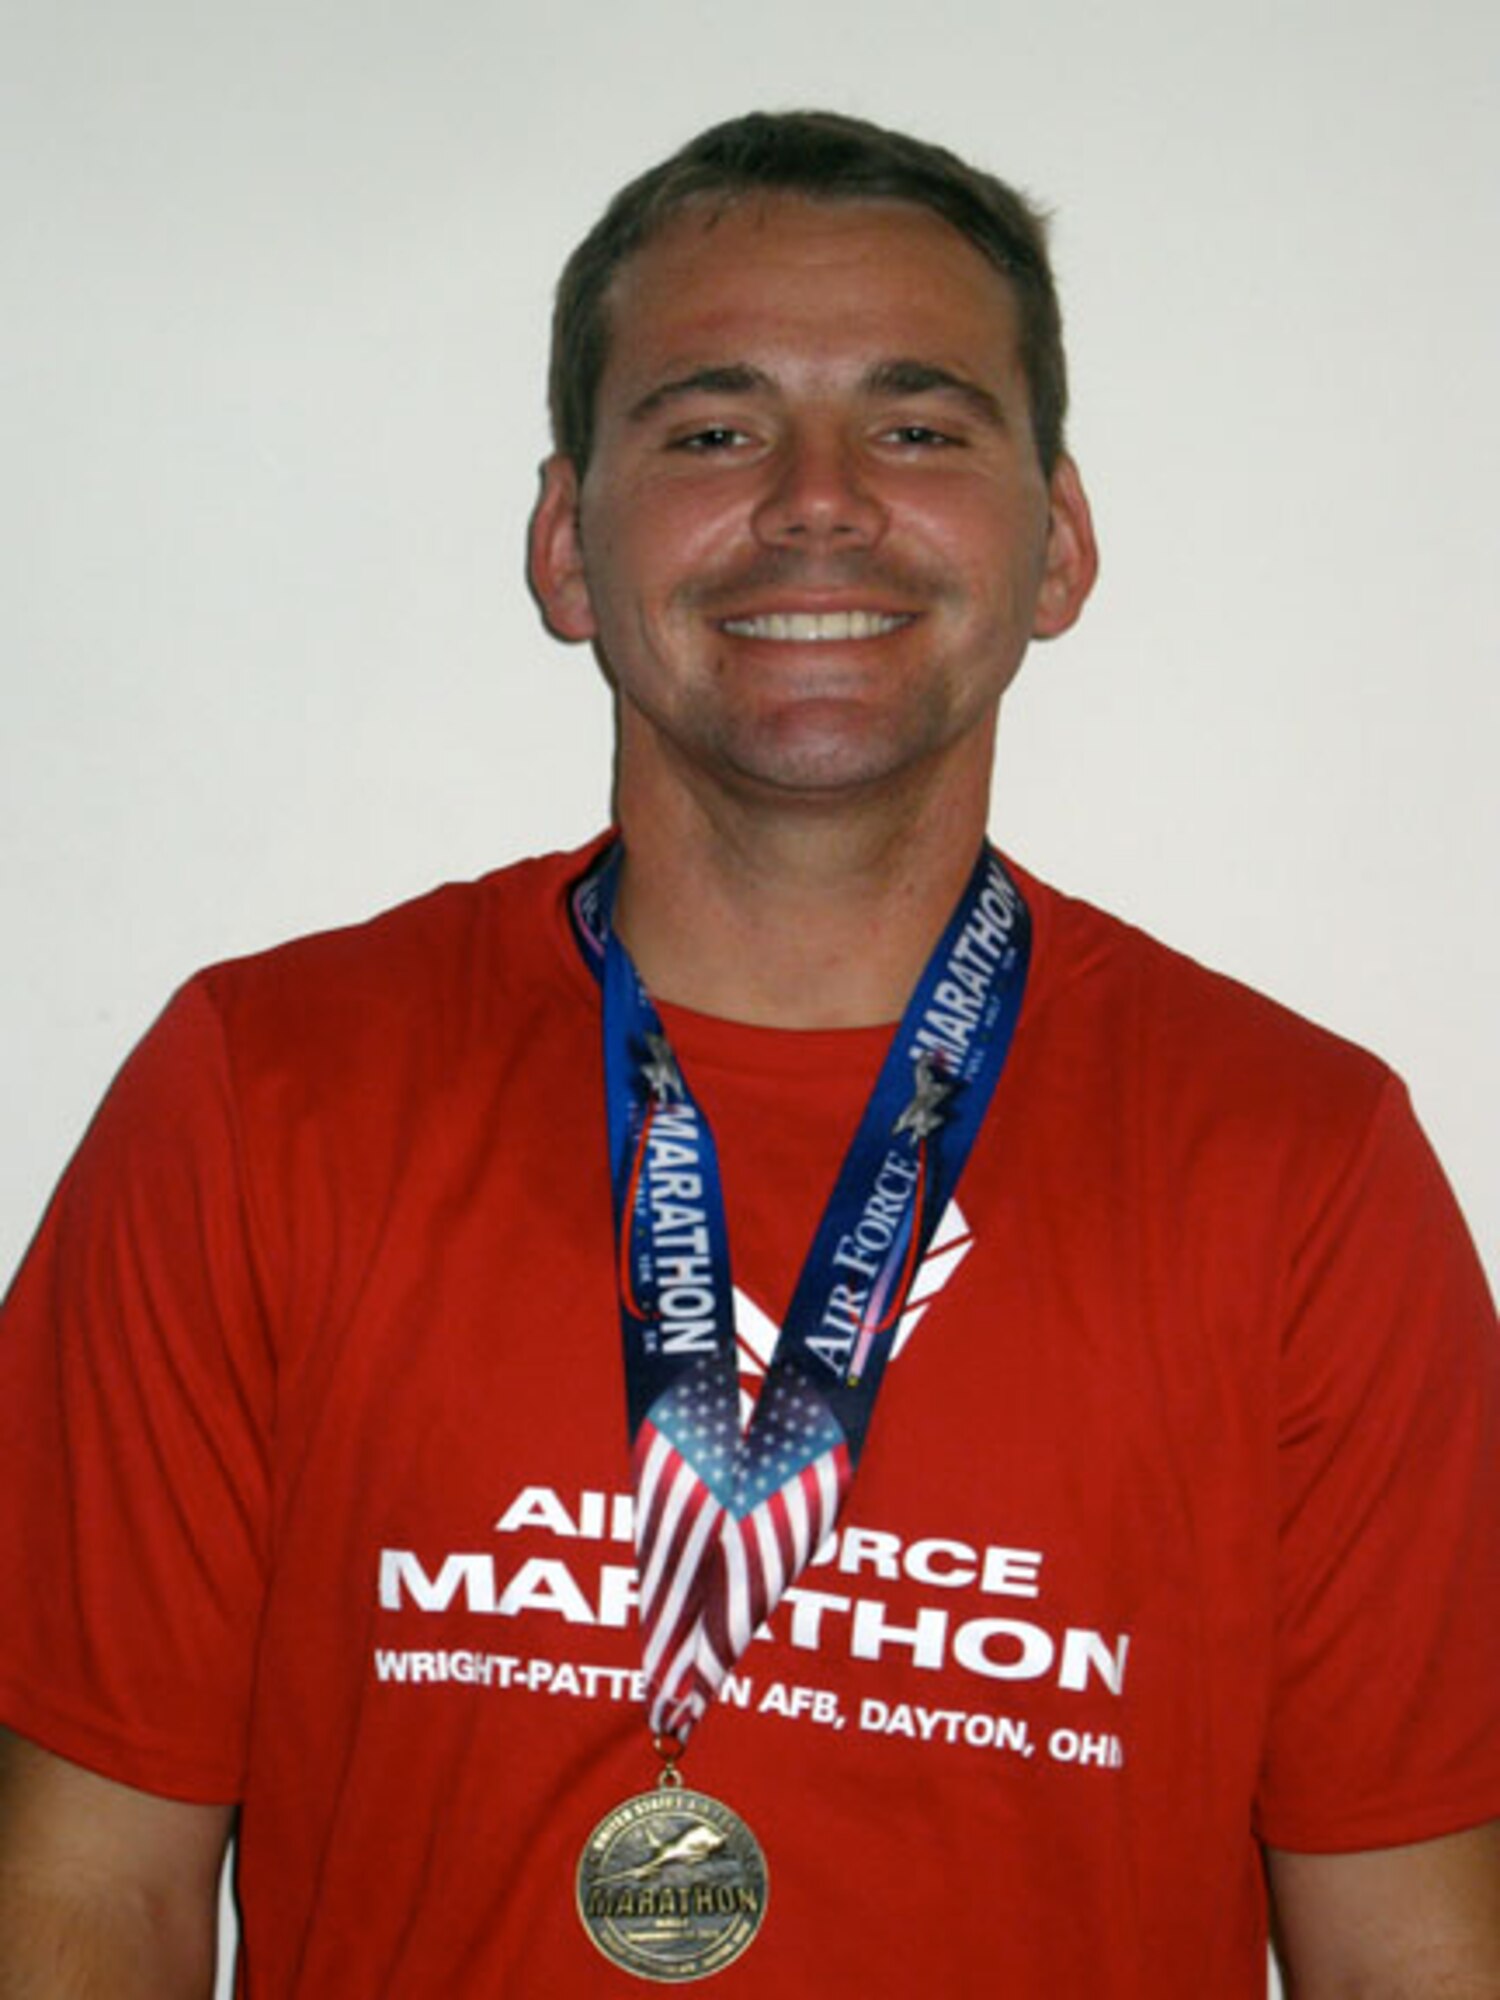 Air Force reservist Staff Sgt. Steve Sobieraj poses for a photo after completing the Air Force Half Marathon Sept. 17, 2011 at Wright-Patterson Air Force Base, Ohio.  Sobieraj is a member of the 452nd Security Forces Squadron at March Air Reserve Base, Calif. (Courtesy photo)